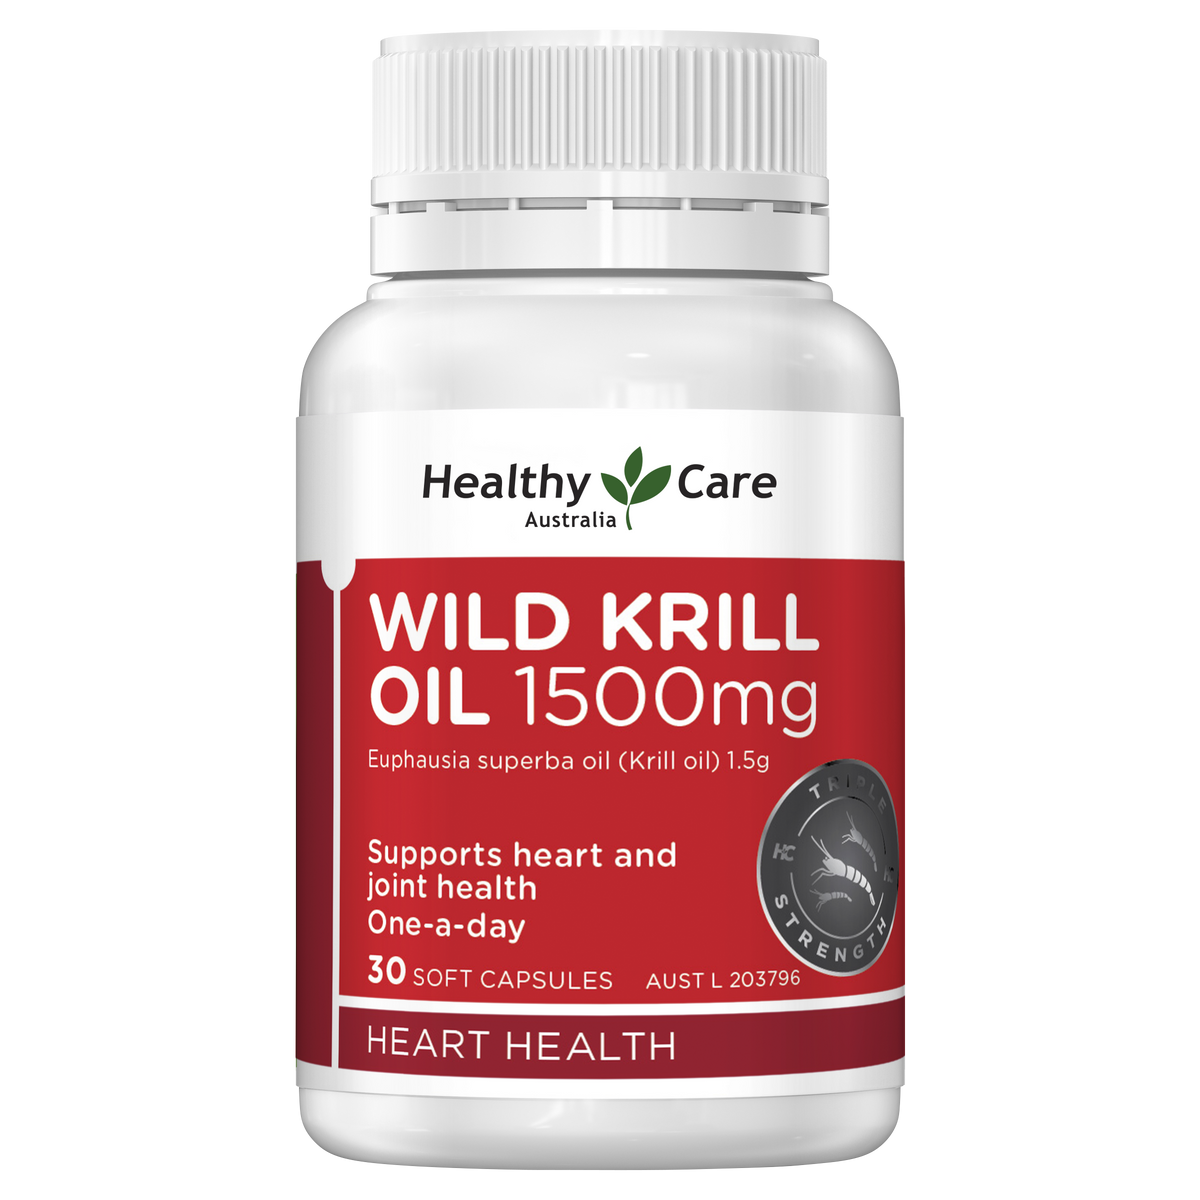 Healthy Care Wild Krill Oil 1500mg 30 Capsules